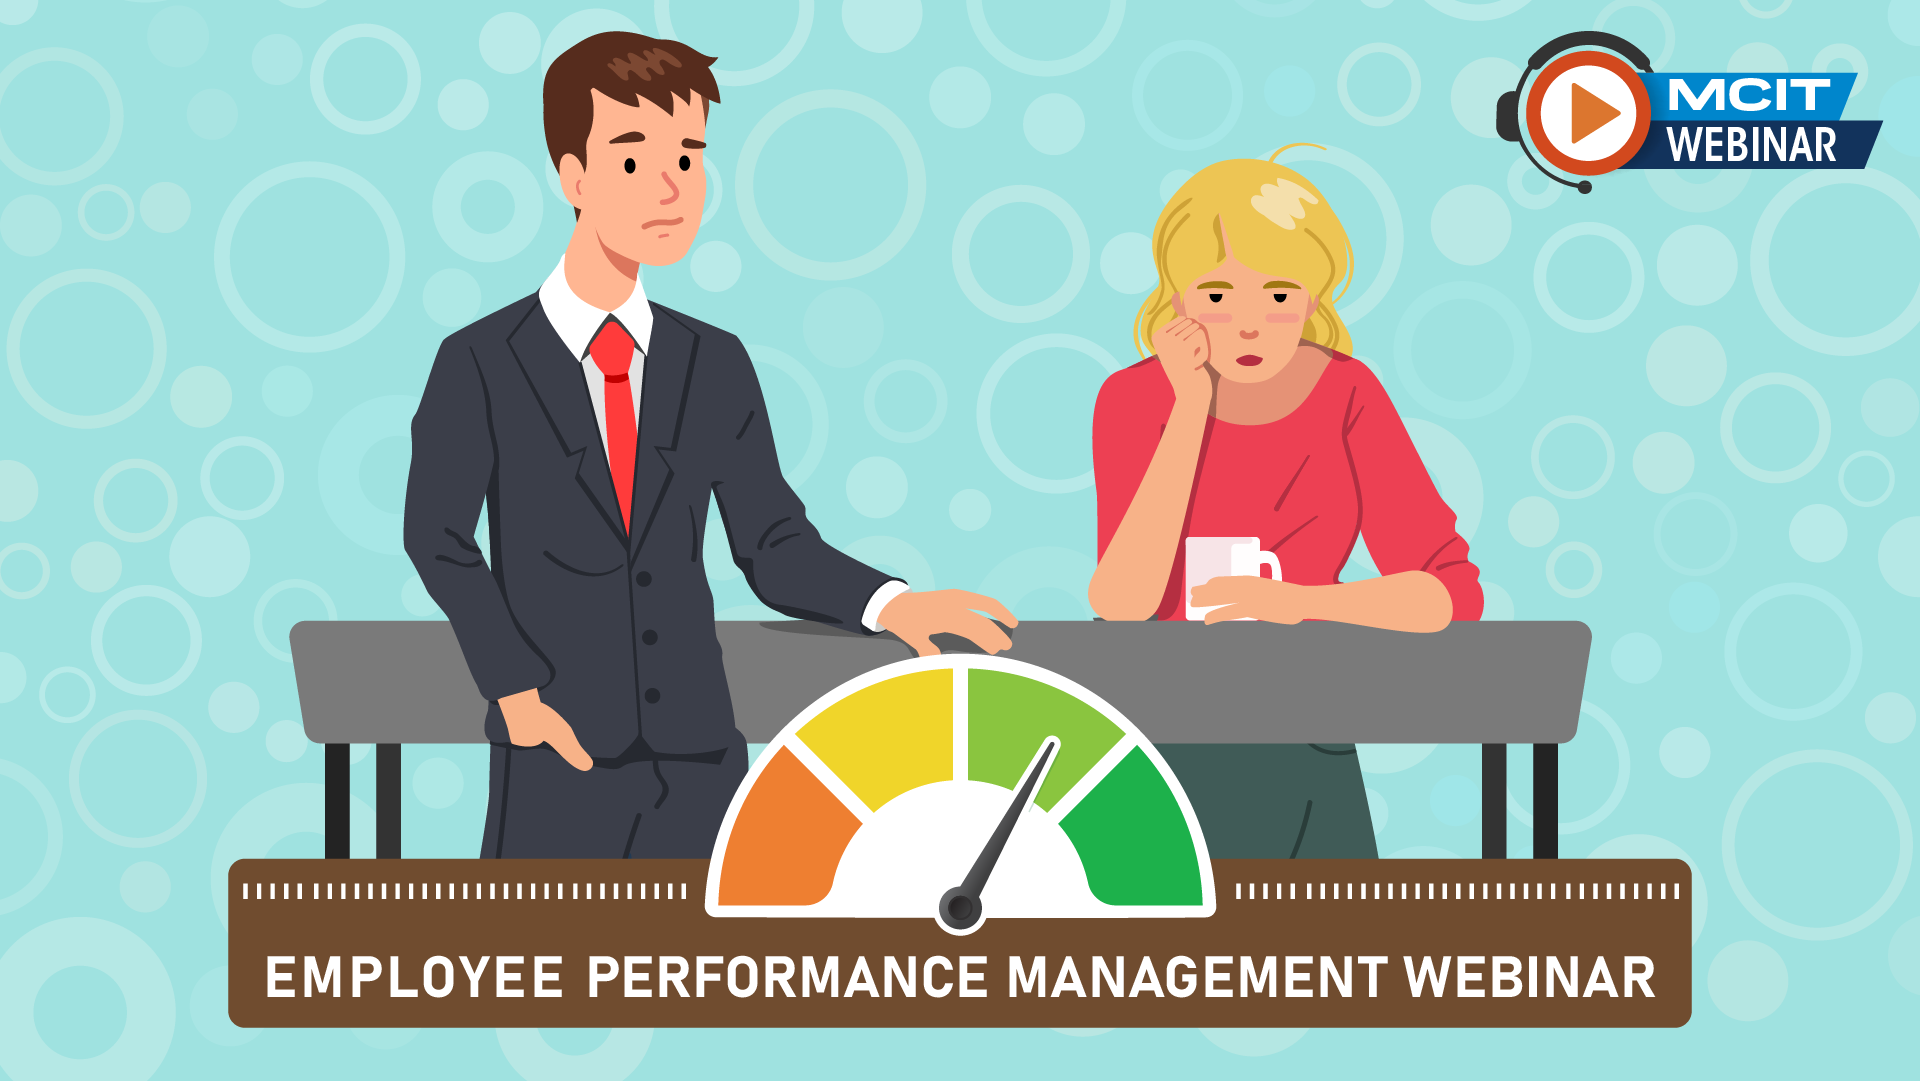 Manager concerned with employee who seems hungover. Light blue background with circles. Color dial pointing at green. Employee Performance Management Webinar - MCIT Webinar